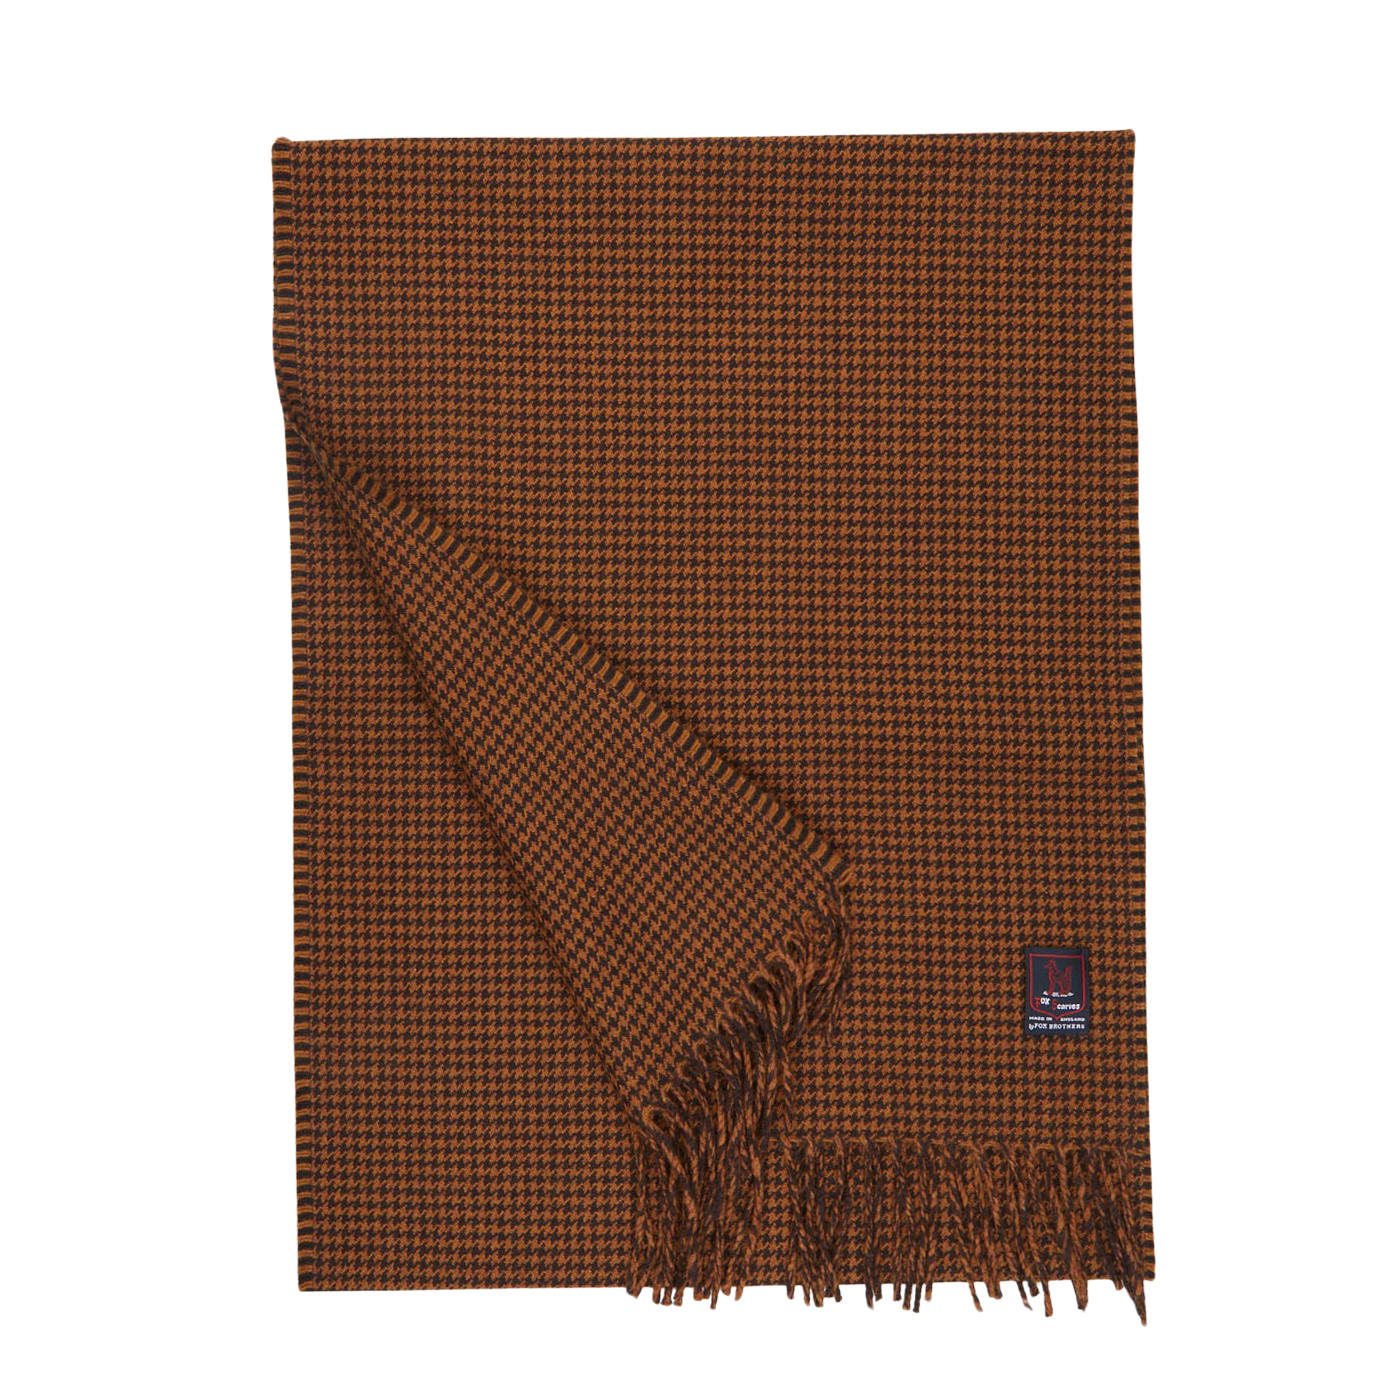 A Chestnut Houndstooth Merino Wool Cashmere Scarf by Fox Brothers on a white background.